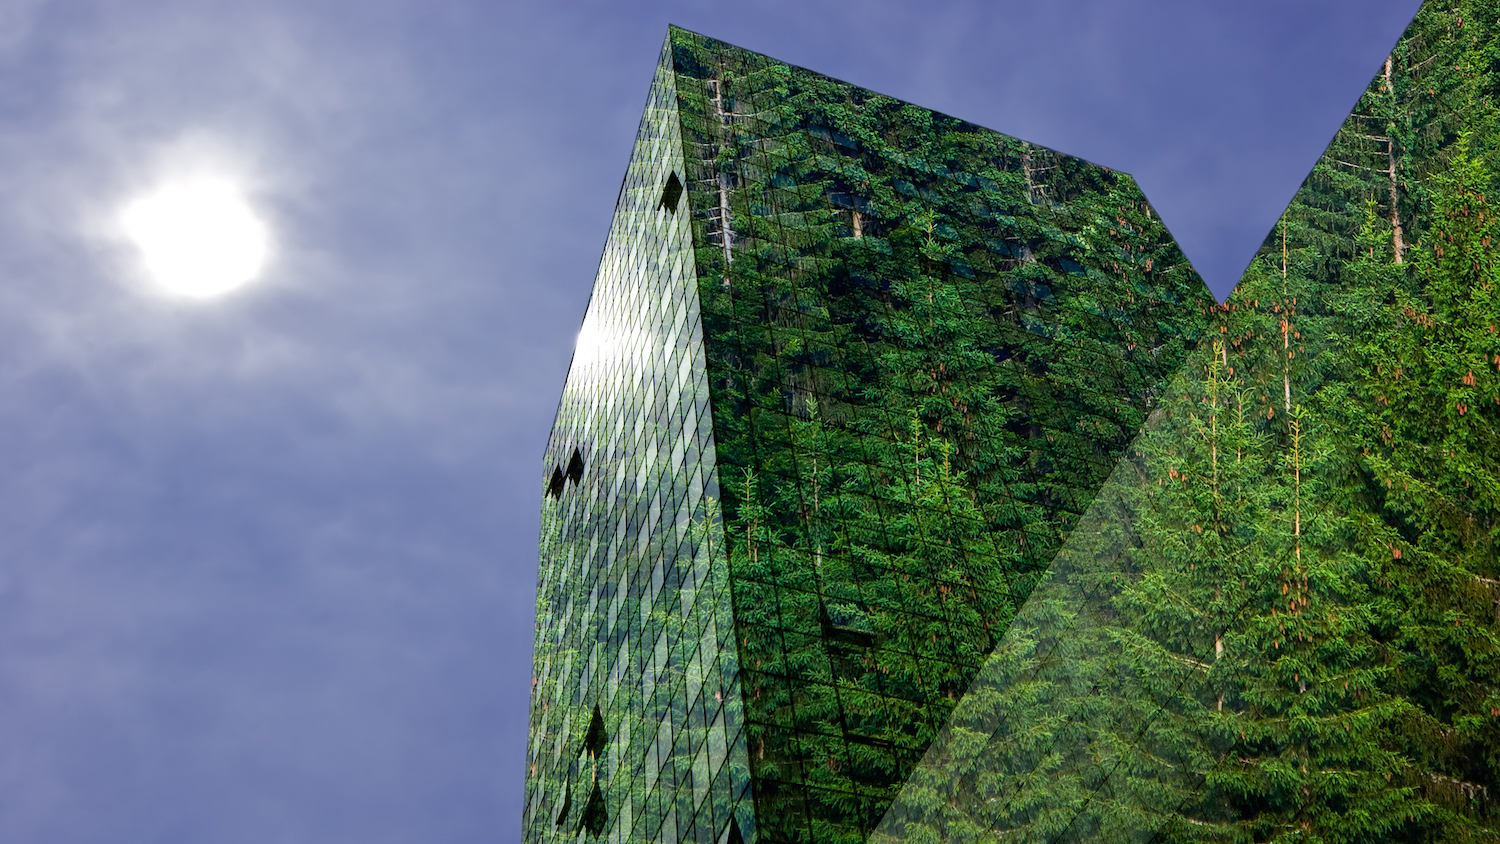 net zero carbon standard - Abstract image of a 'green' building to illustrate net zero carbon standard story